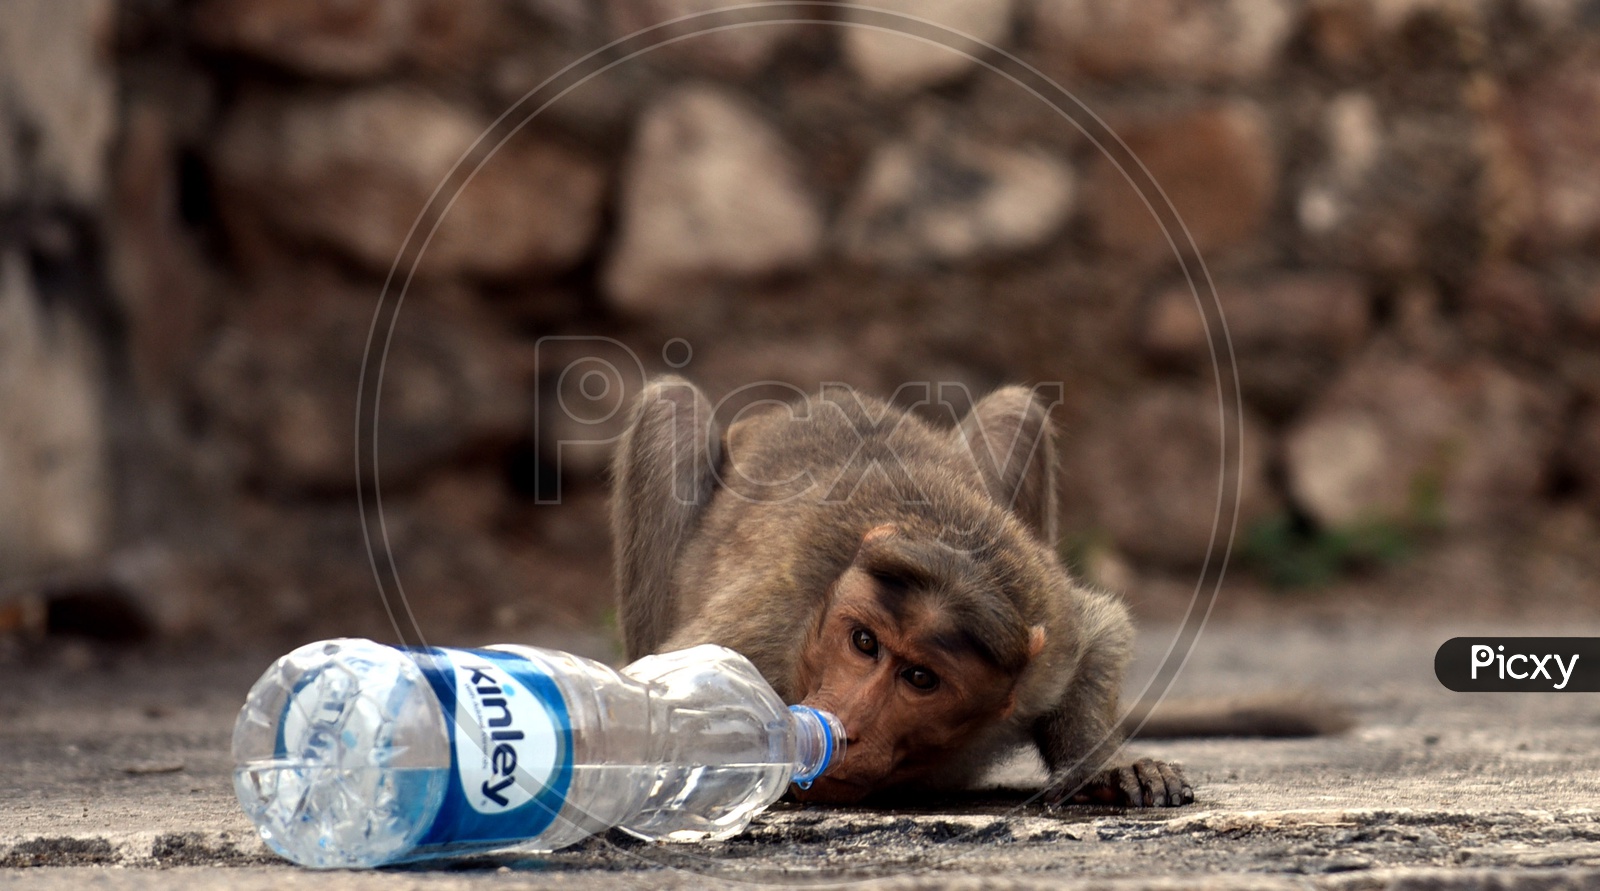 A Macaque or Monkey Drinking Water In a Bottle